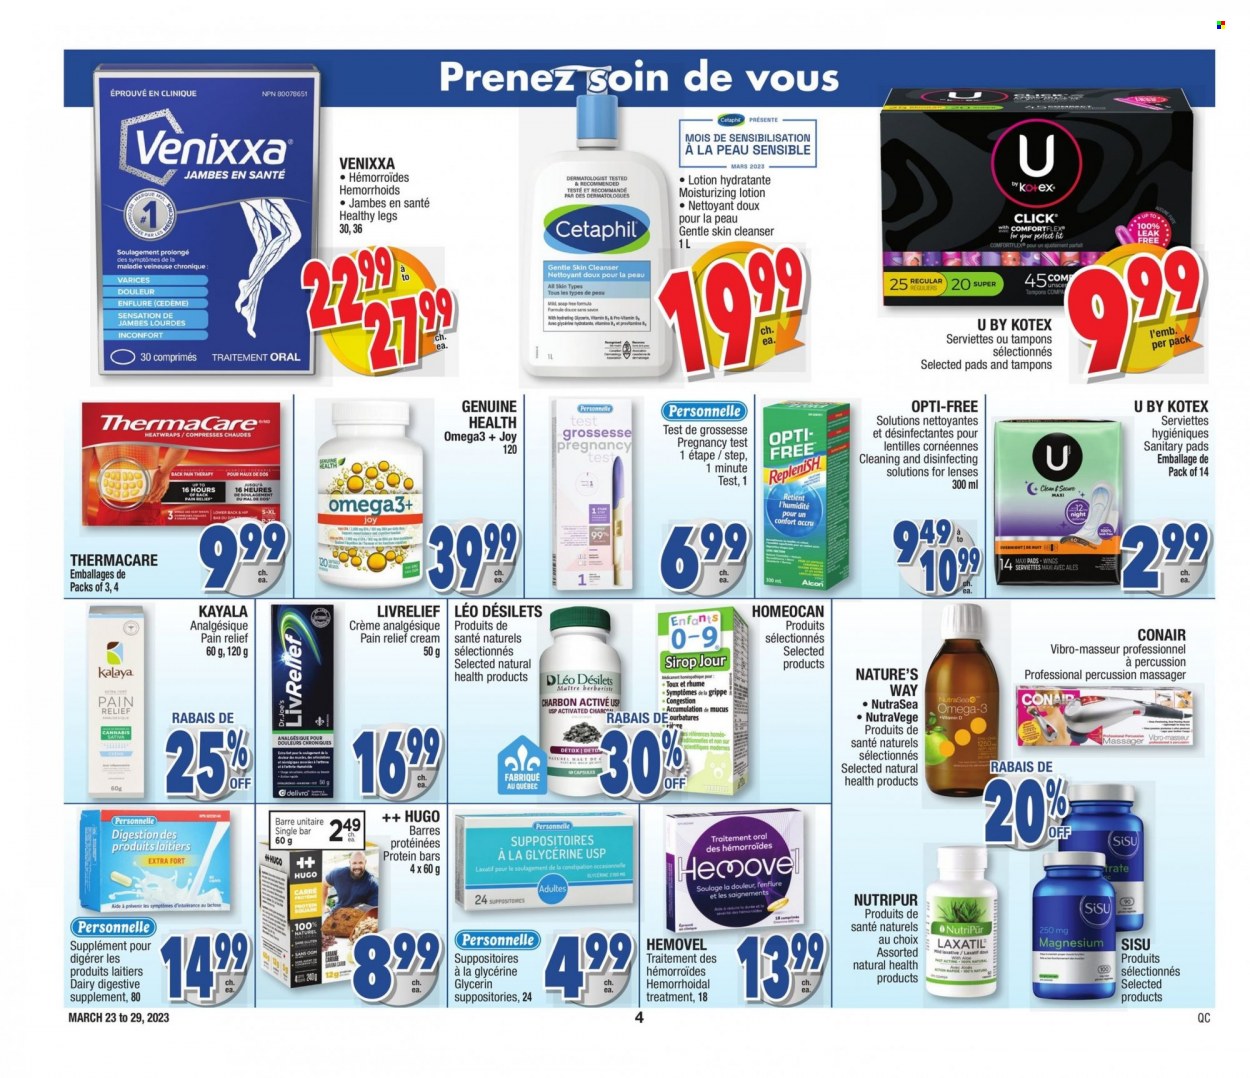 thumbnail - Jean Coutu Flyer - March 23, 2023 - March 29, 2023 - Sales products - Mars, protein bar, Joy, soap, sanitary pads, Kotex, tampons, cleanser, Clinique, body lotion, serviettes, percussion instrument, Hewlett Packard, massager, pain relief, magnesium, Thermacare, Omega-3, laxative, lenses, pregnancy test. Page 4.